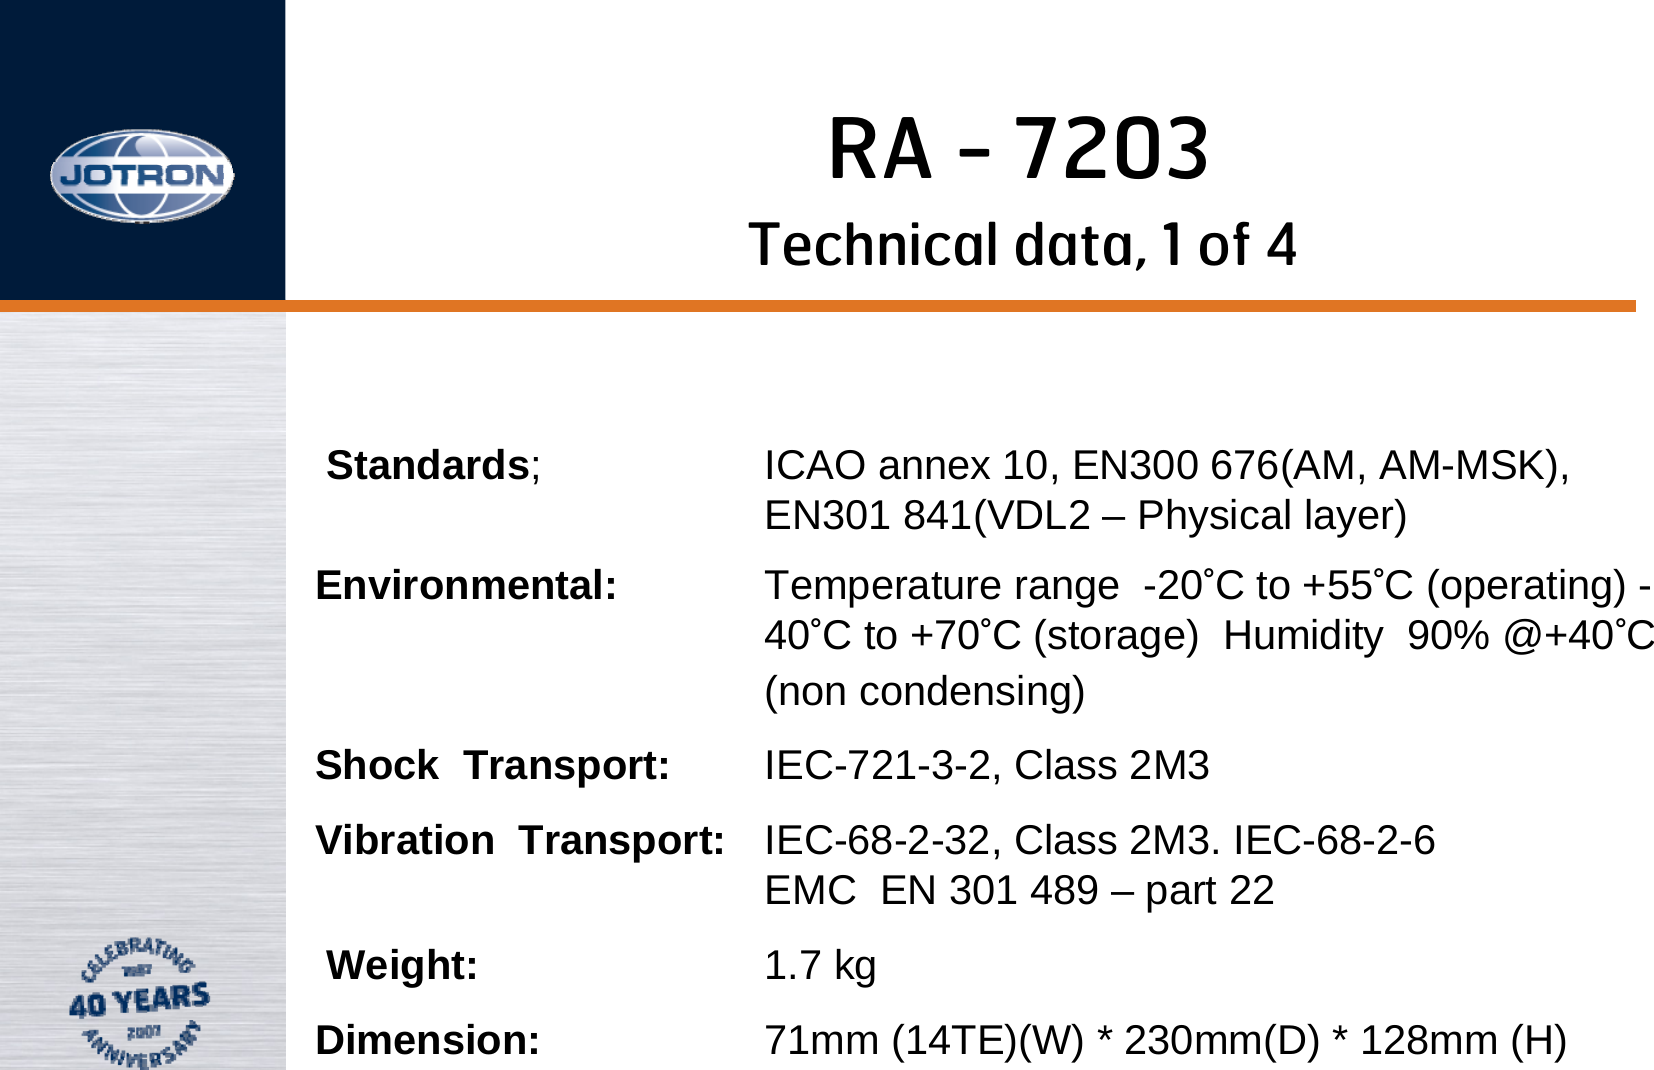 RA - 7203Technical data, 1 of 4Standards; ICAO annex 10, EN300 676(AM, AM-MSK),                EN301 841(VDL2 – Physical layer)Environmental: Temperature range  -20°C to +55°C (operating) -40°C to +70°C (storage)  Humidity  90% @+40°C (non condensing)Shock  Transport: IEC-721-3-2, Class 2M3  Vibration  Transport: IEC-68-2-32, Class 2M3. IEC-68-2-6                            EMC  EN 301 489 – part 22Weight: 1.7 kgDimension: 71mm (14TE)(W) * 230mm(D) * 128mm (H)